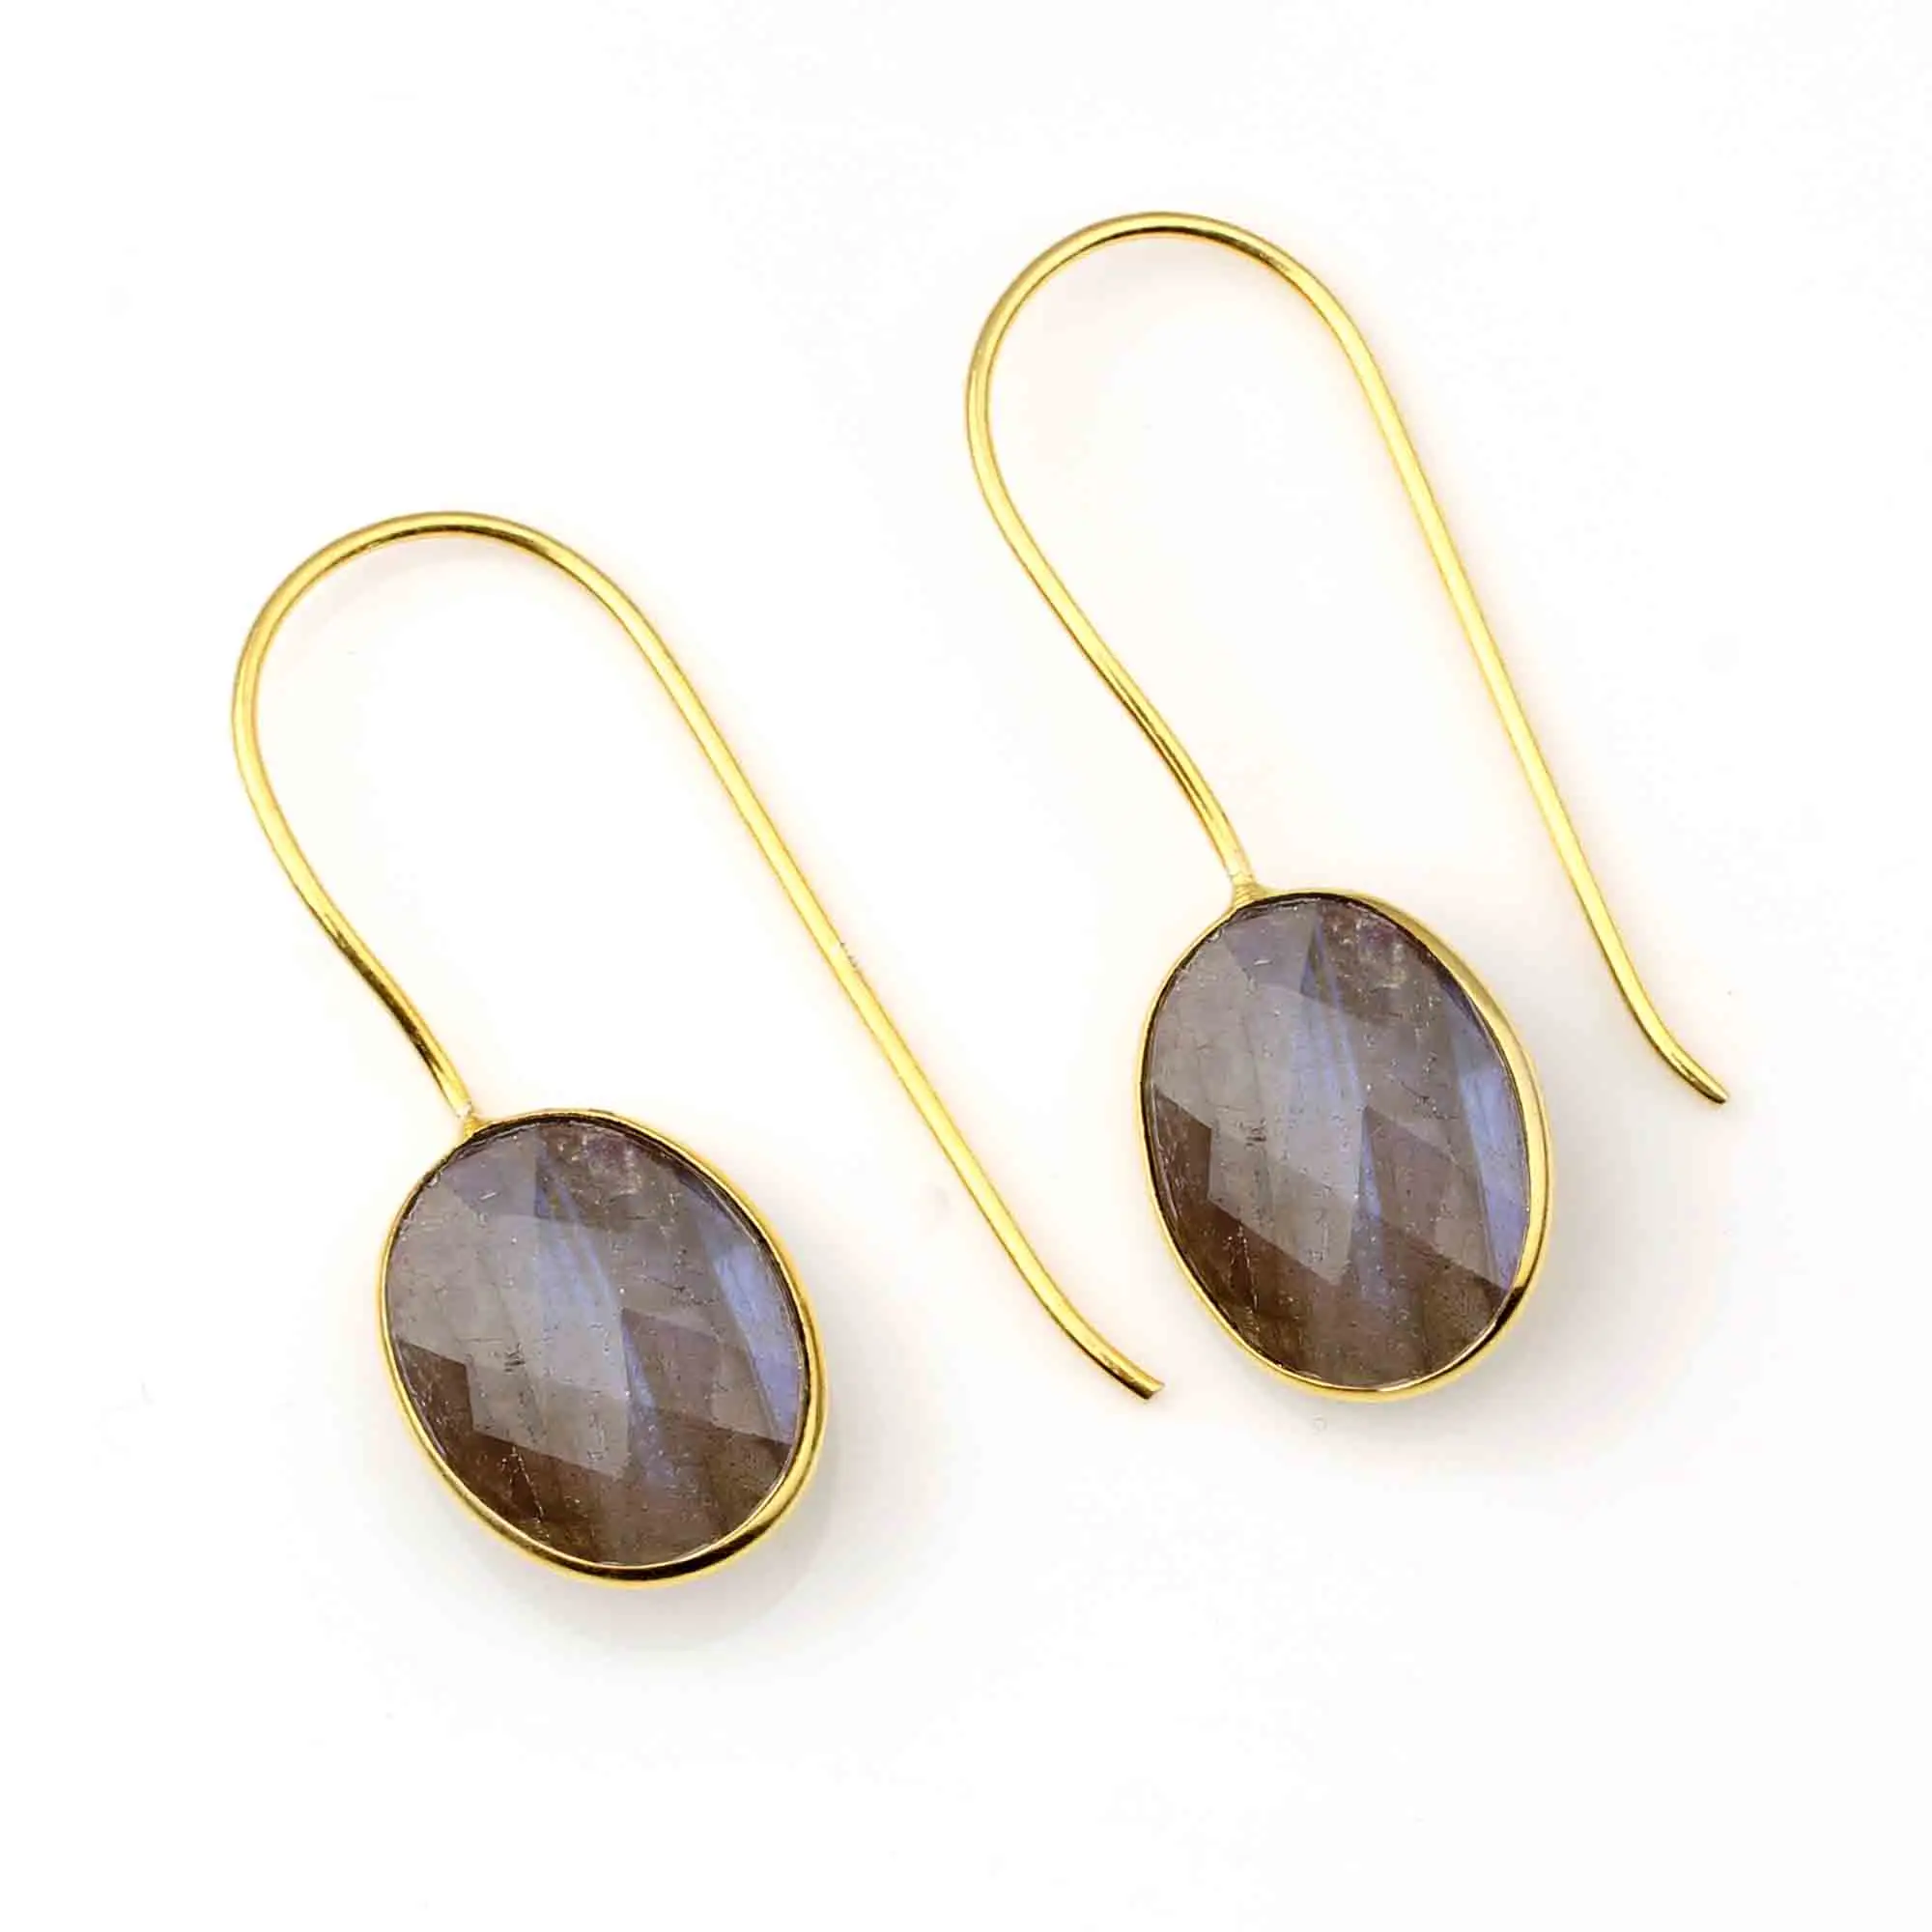 Natural Labradorite Gemstone Earrings Wholesale Indian Jewelry Beautiful Design 925 Sterling Silver Gold Plated Dangle Earring